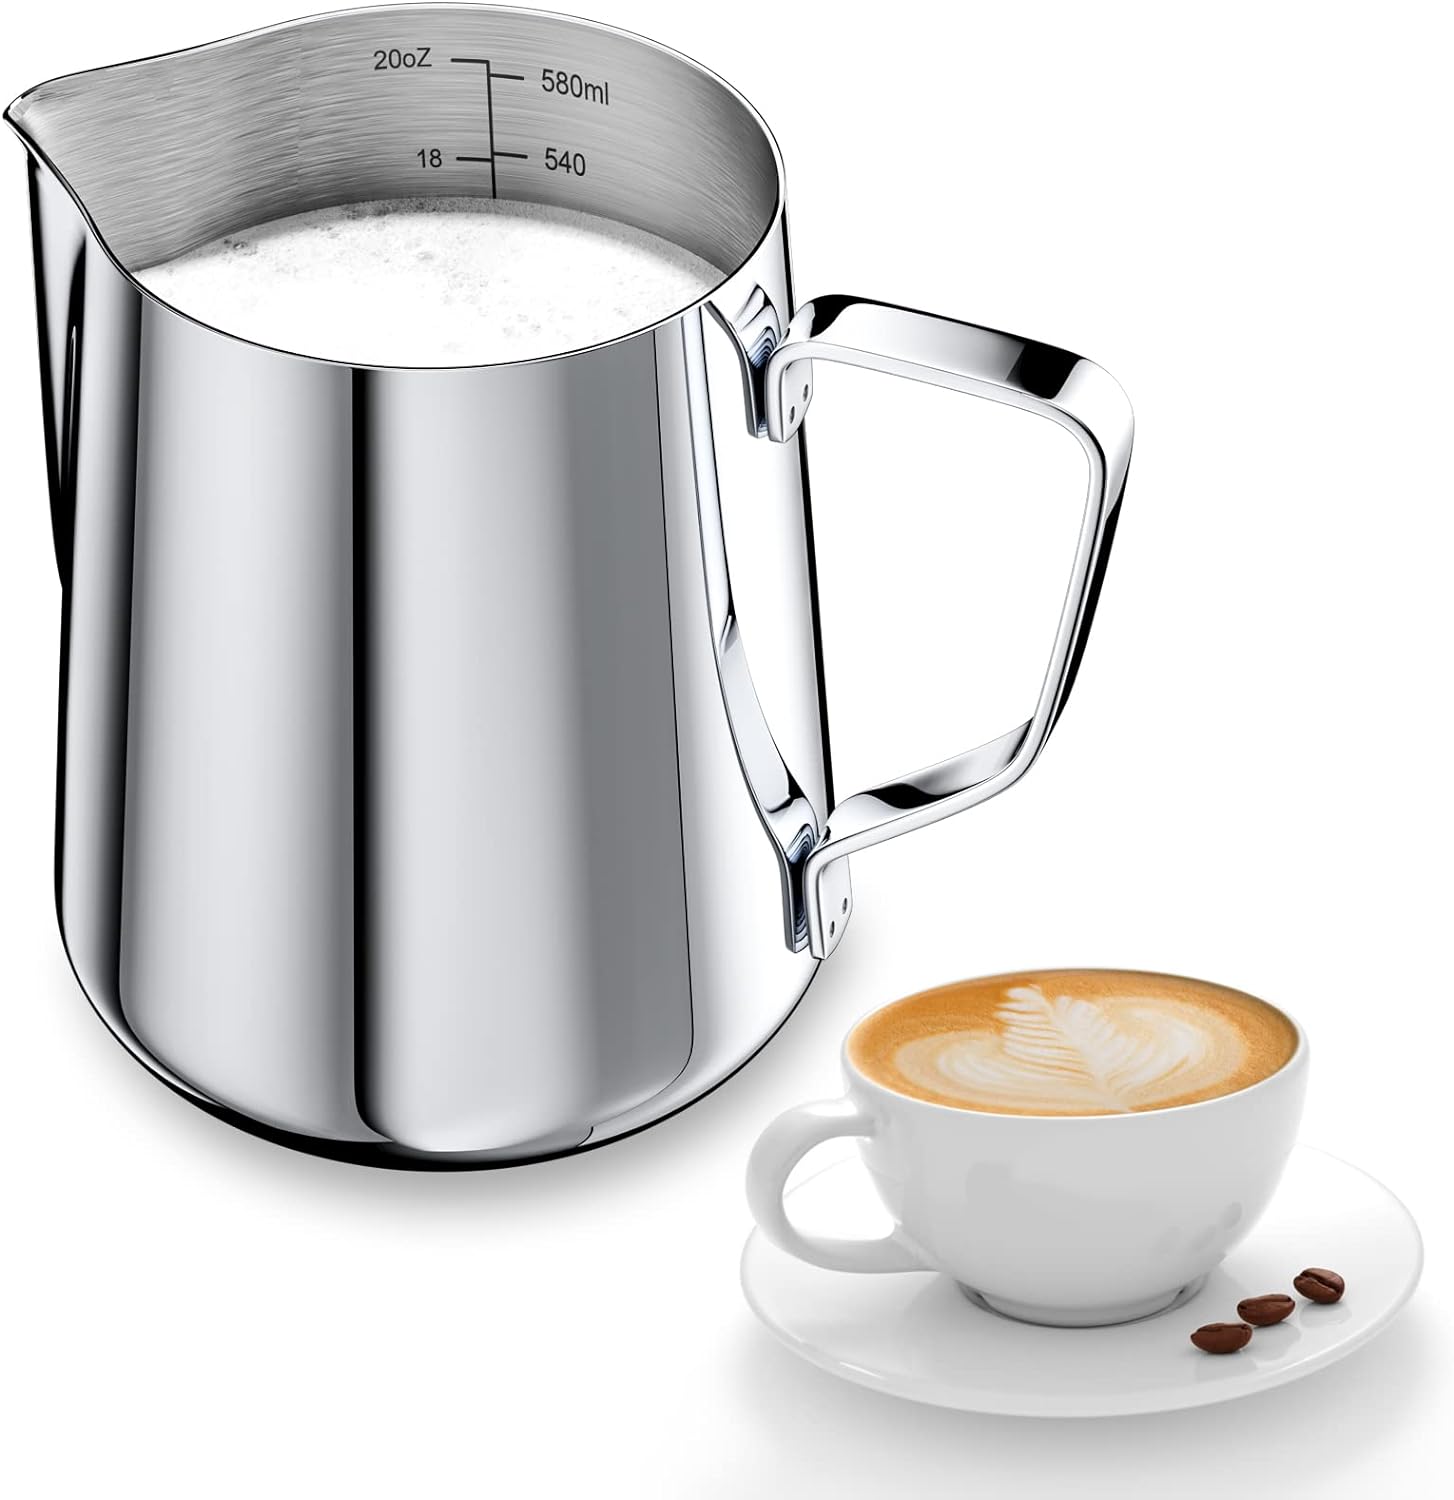 Newaner 600 ml Milk Jug for Milk Frothing 304 Stainless Steel, Milk Jug with Measurement Mark 12 oz for Barista, Milk Pitcher for Cappuccino, Espresso, Latte Art, Perfect for Coffee Lovers, Silver